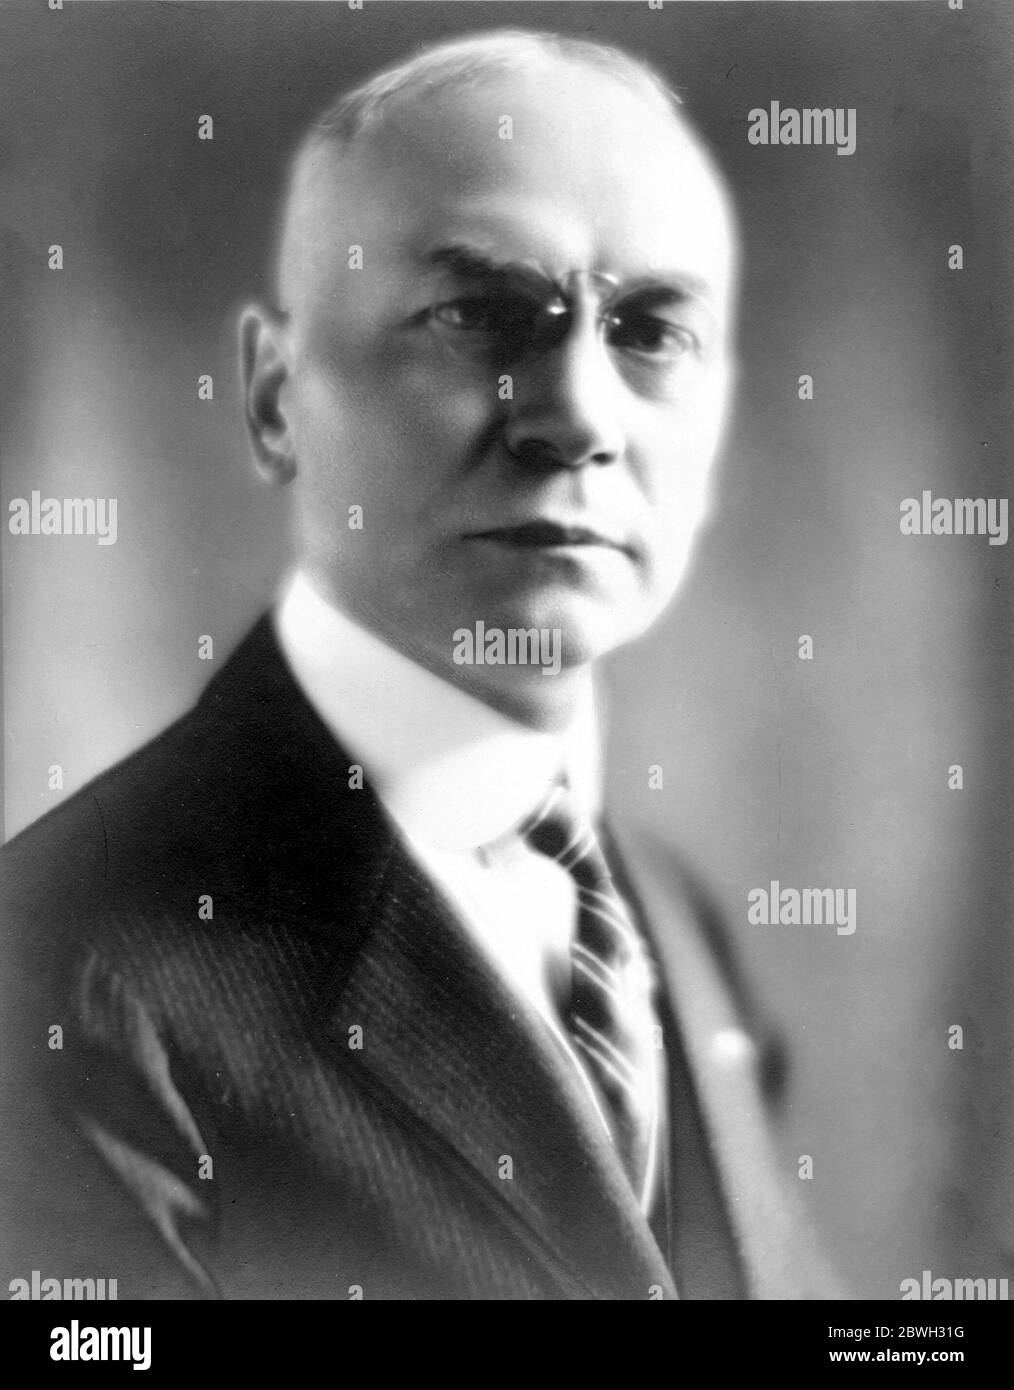 William Elvis Sloan I (1867 – 1961) inventor of the Flushometer flushing mechanism for toilets and urinals.] Stock Photo